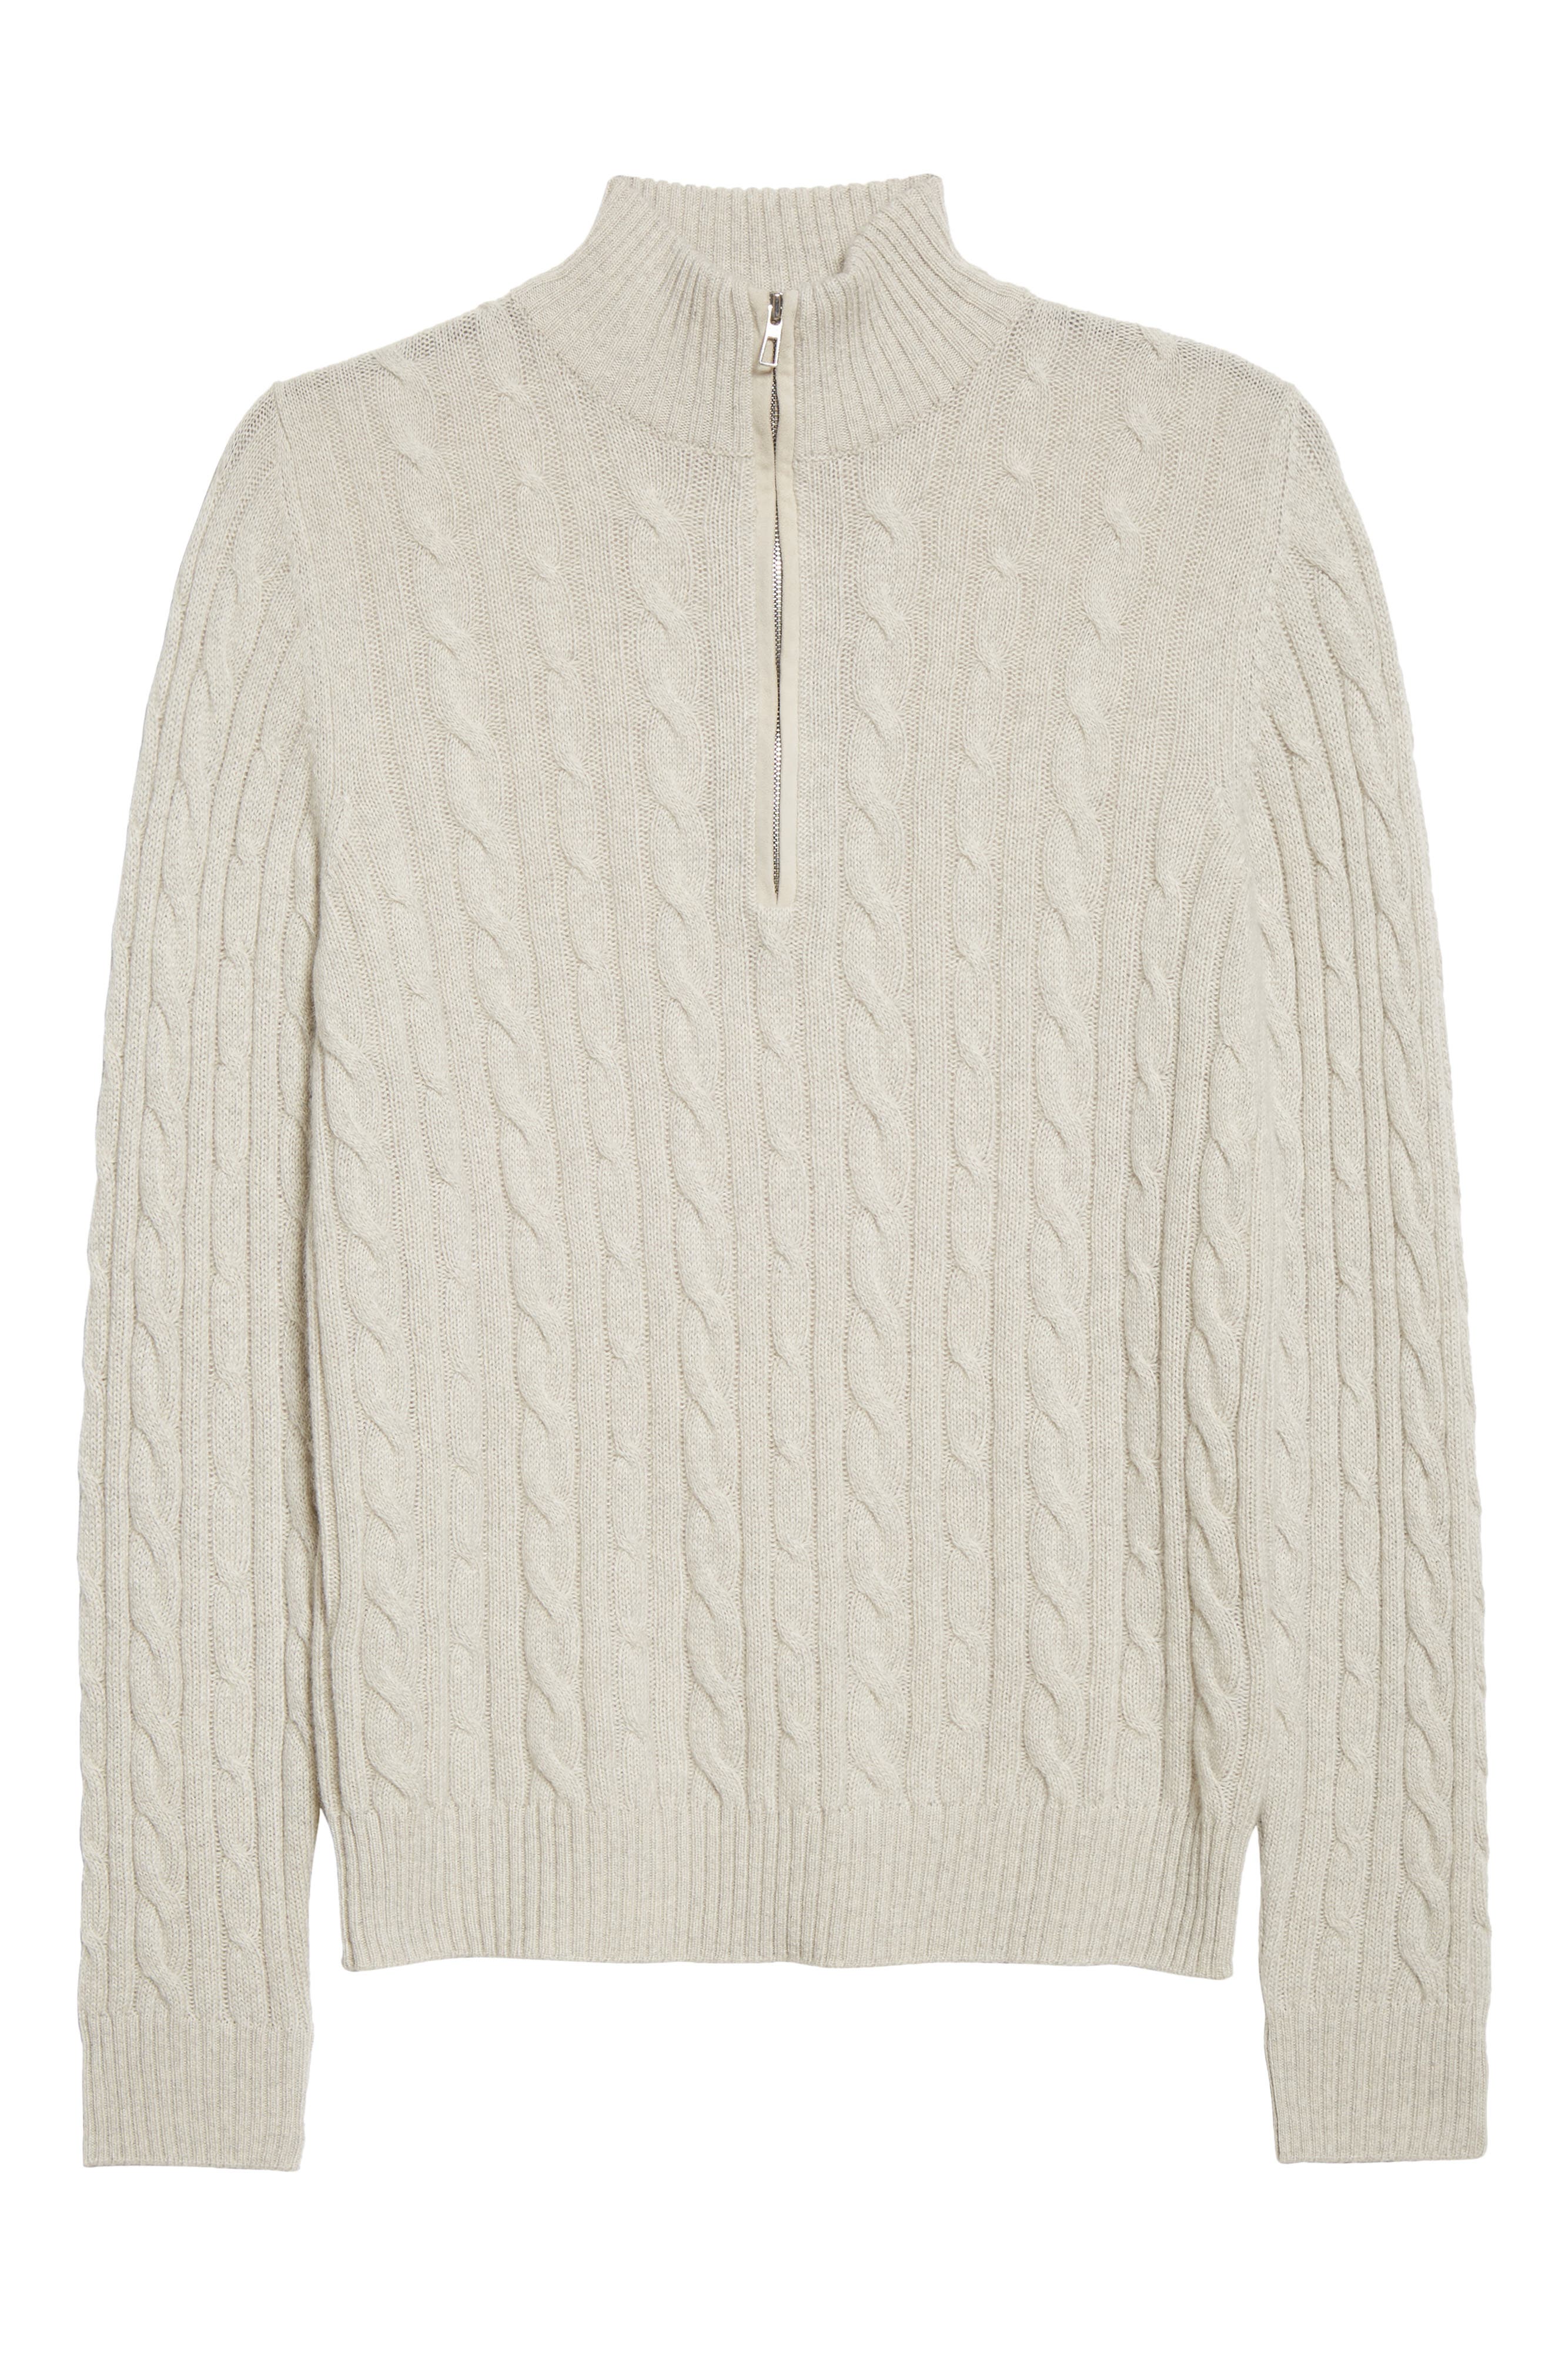 BABY CASHMERE KNIT P/O natural white